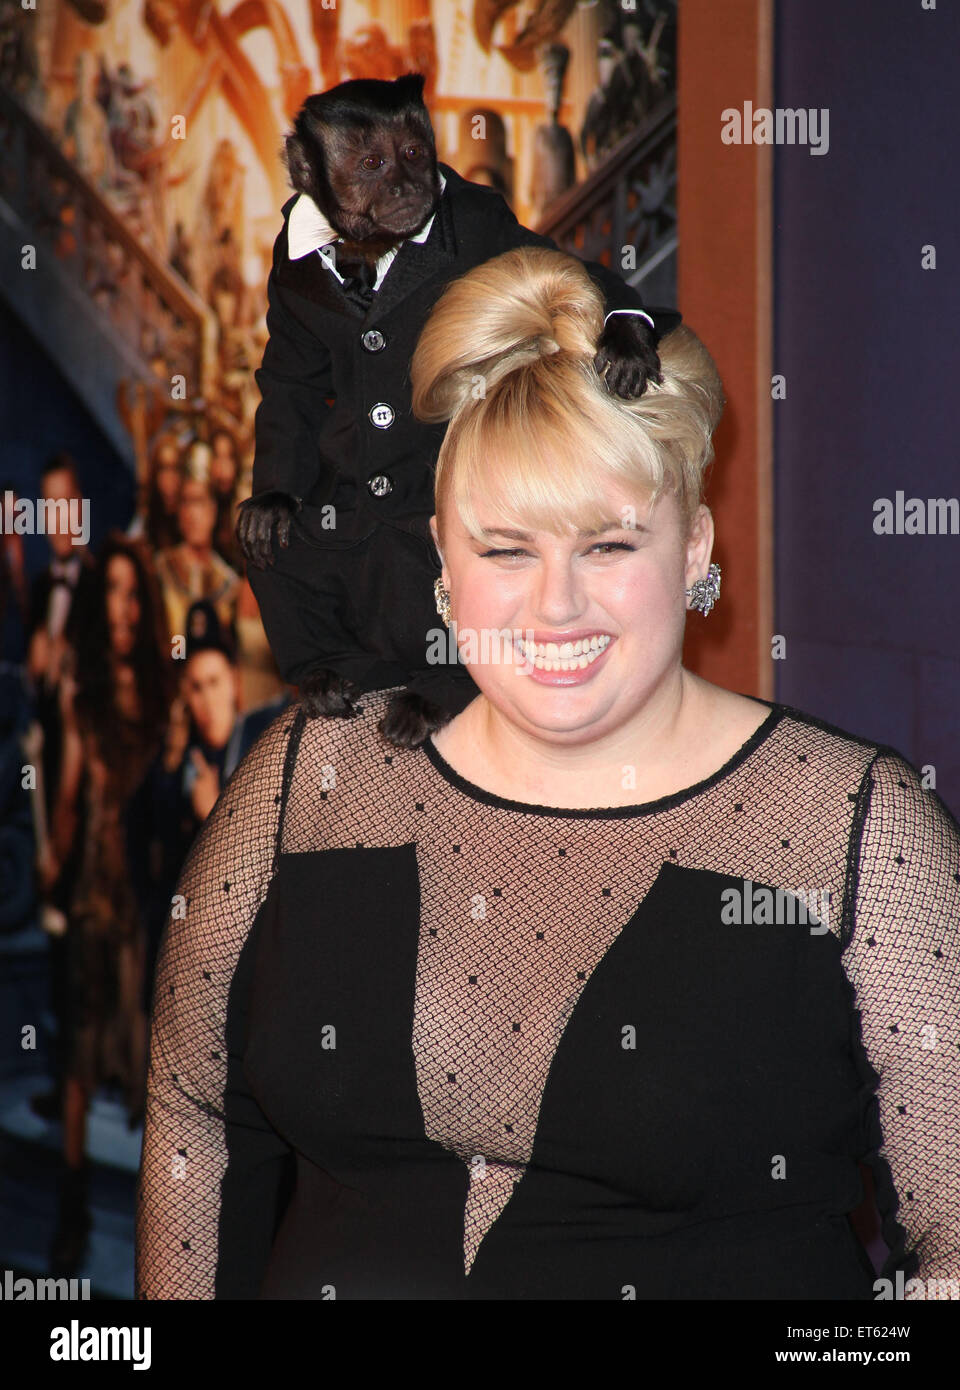 New York Premiere of 'Night at the Museum: Secret of the Tomb' at The Ziegfeld Theater - Arrivals  Featuring: Crystal The Monkey, Rebel Wilson Where: New York City, New York, United States When: 12 Dec 2014 Credit: PNP/WENN.com Stock Photo